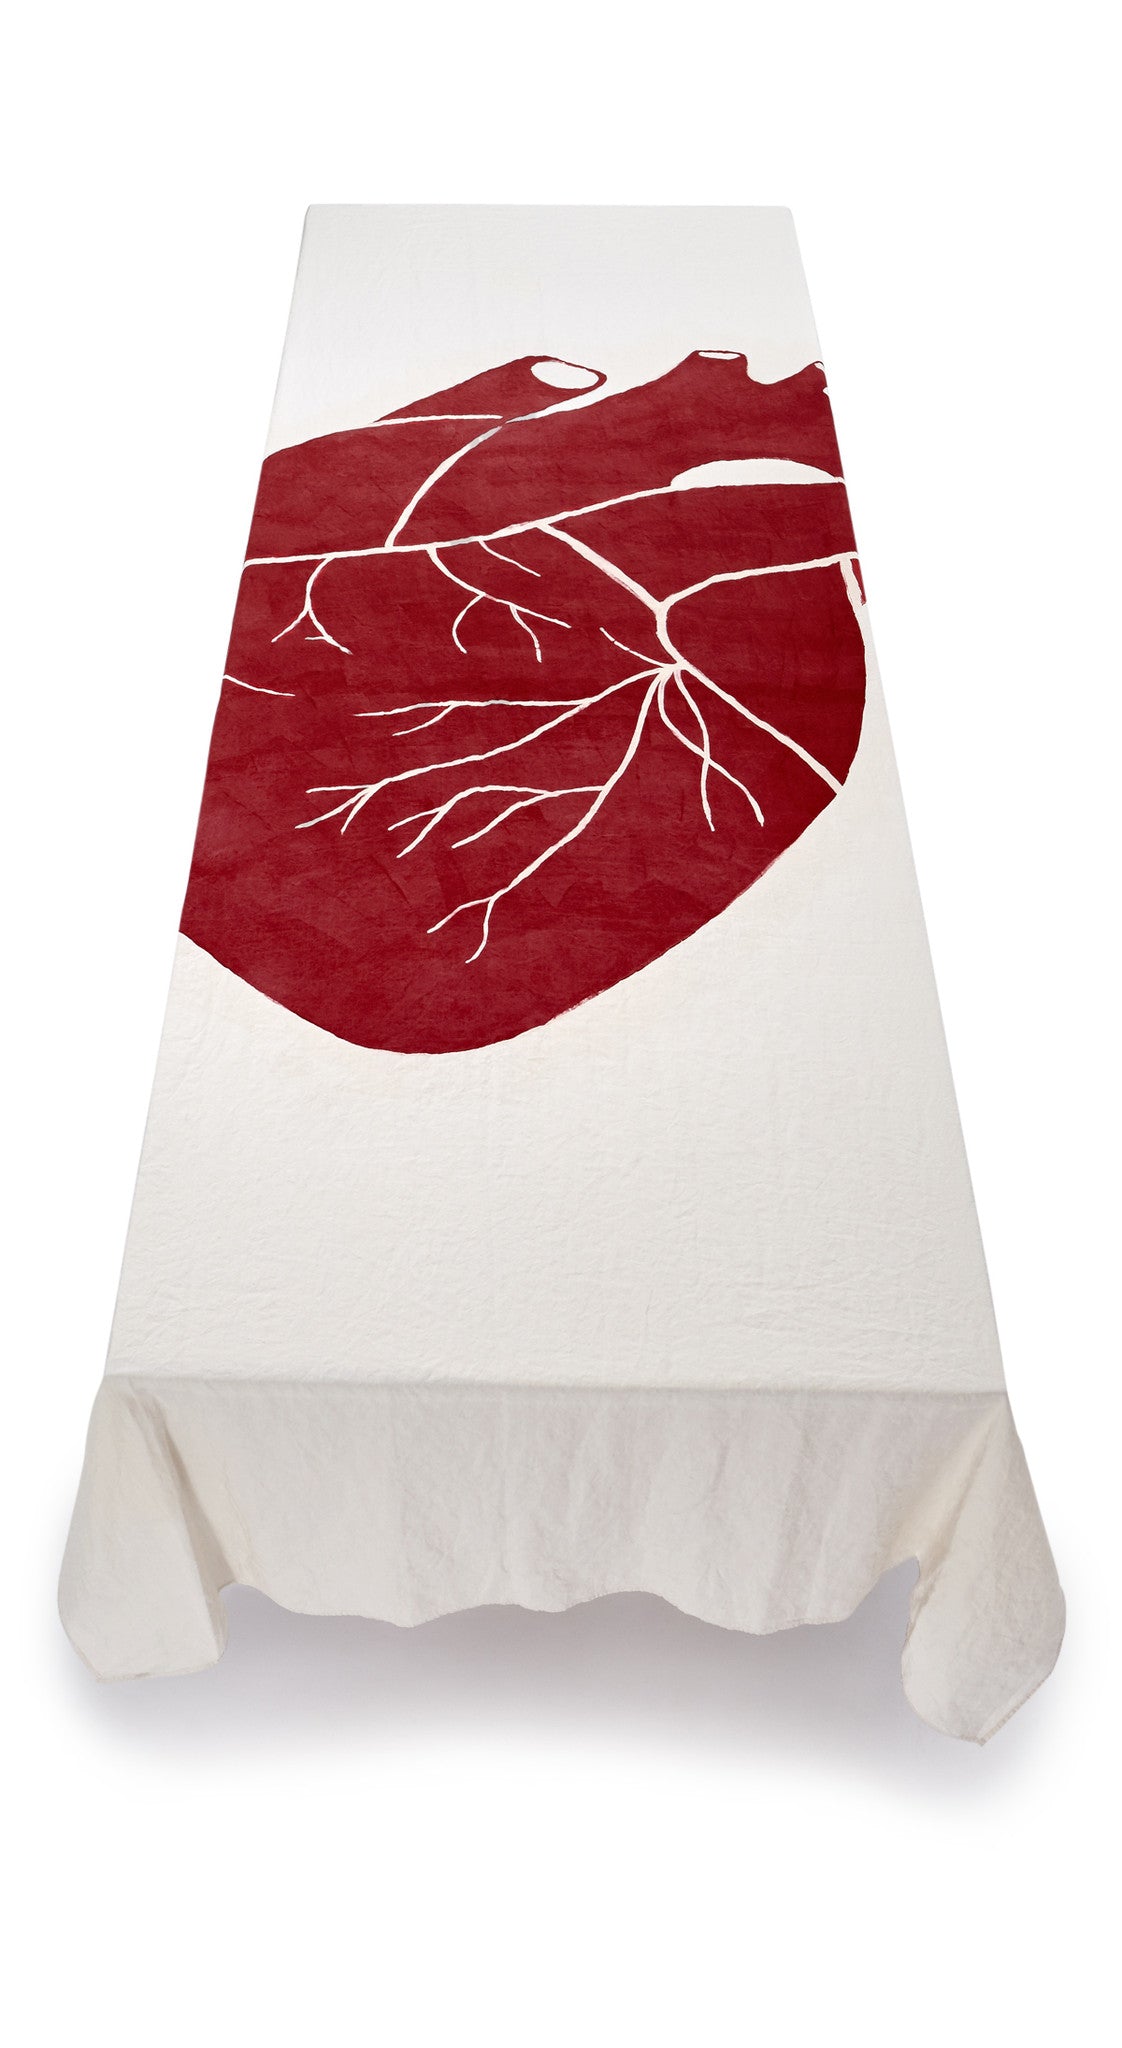 "The Heart Of The Home" Summerill & Bishop x Solange Linen Tablecloth